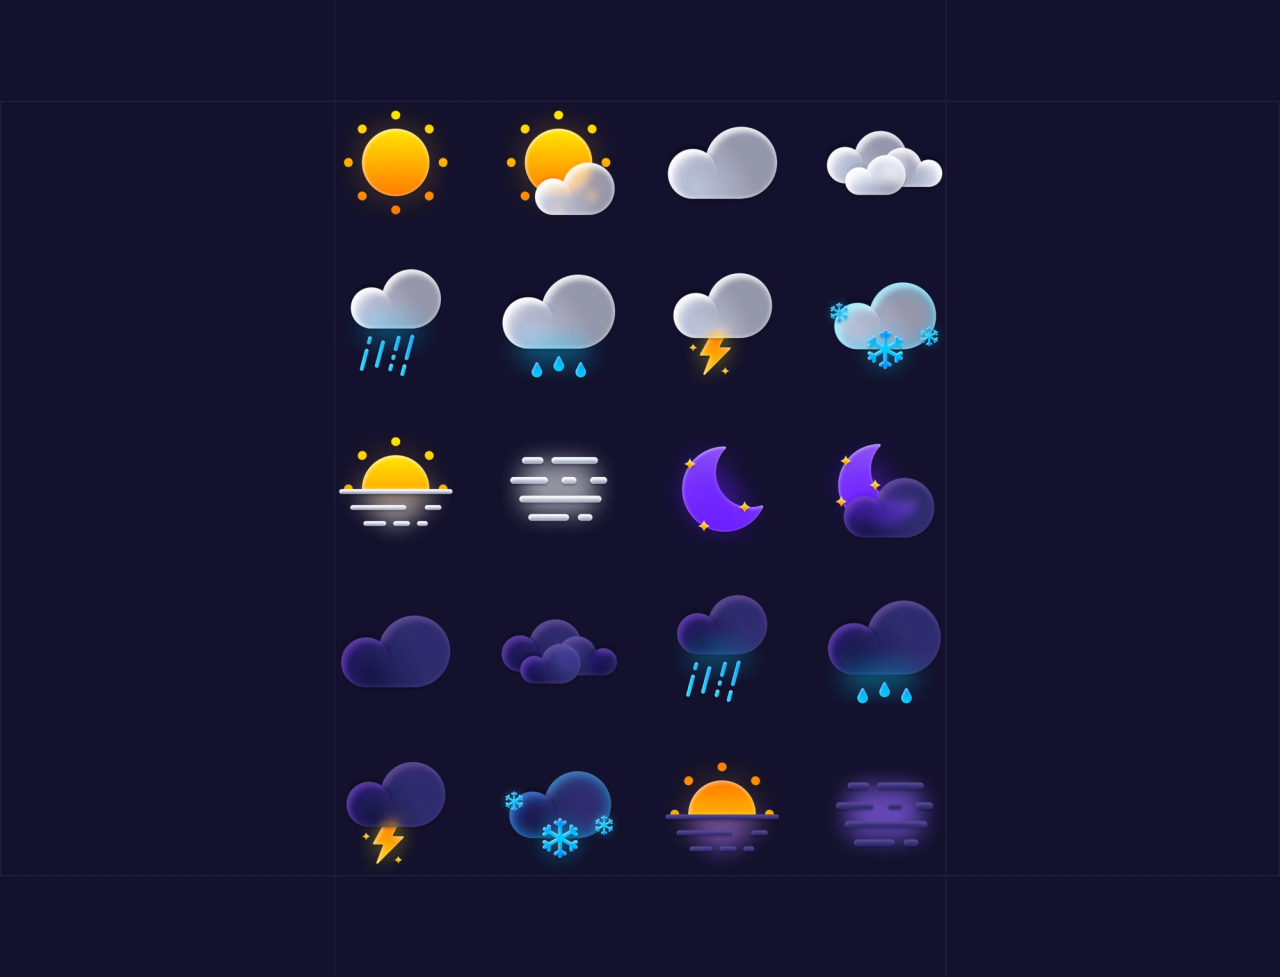 A grid of all different weather condition icons in day and night variants